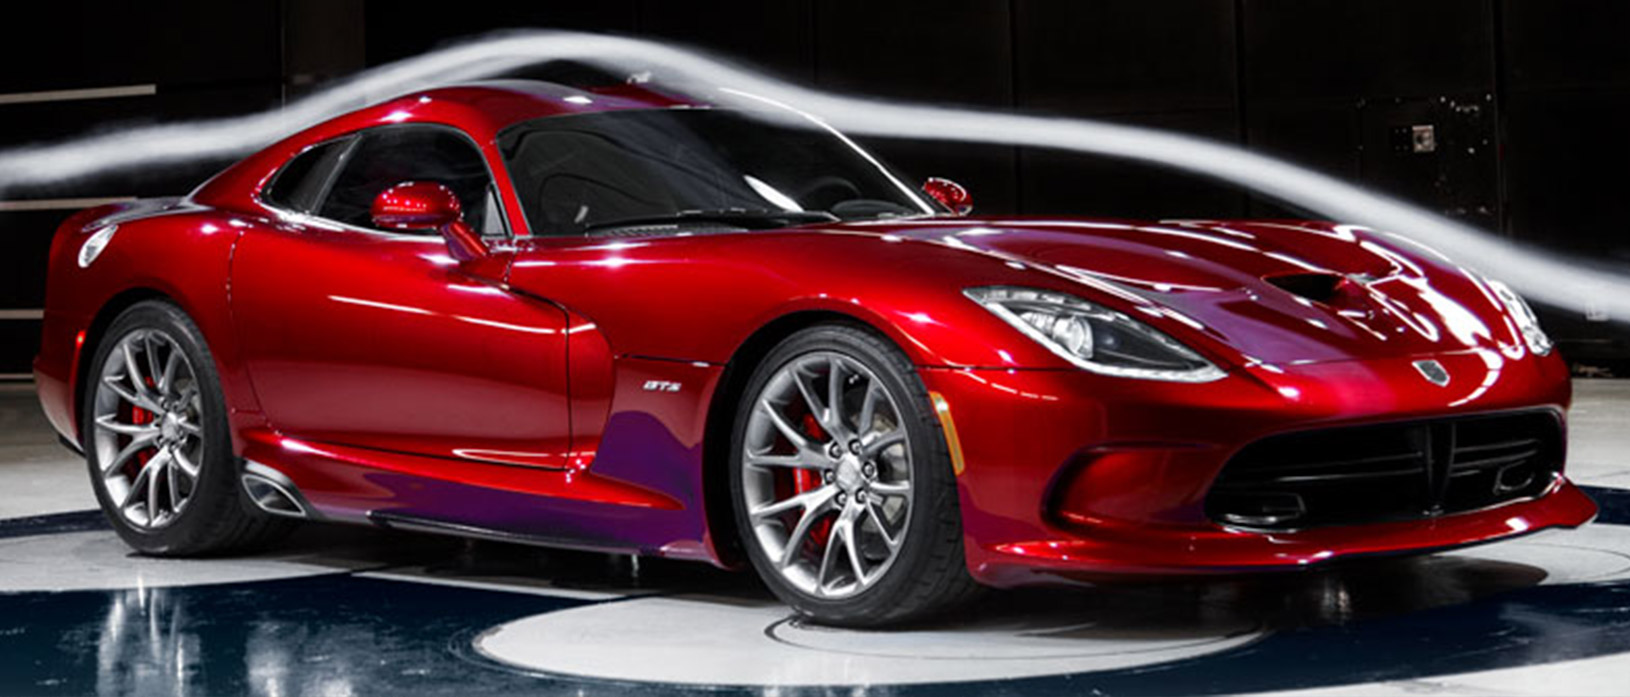 Red Dodge Viper in the wind tunnel